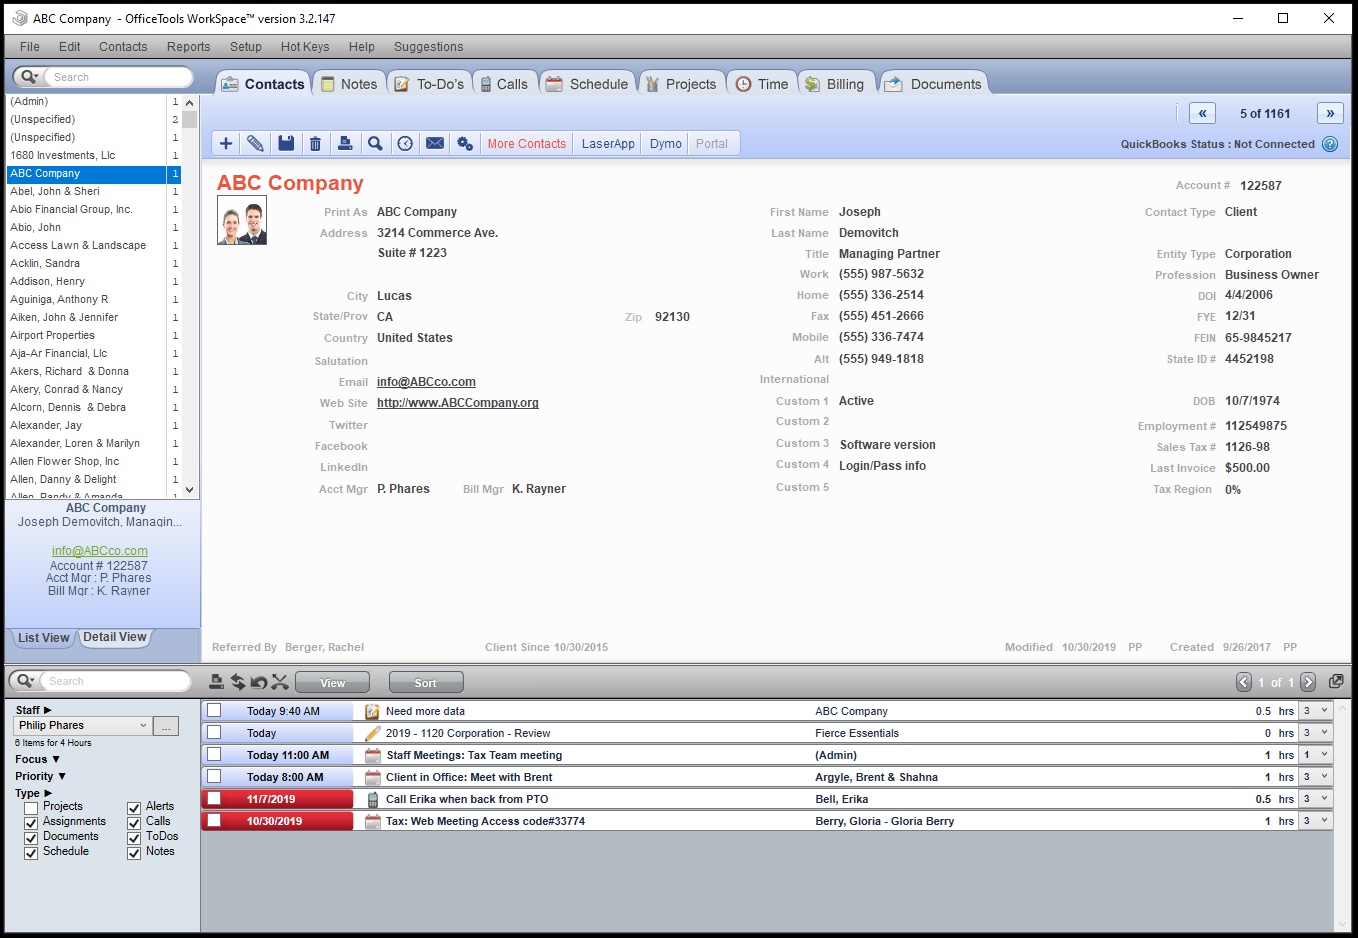 A screenshot of the client view in OfficeTools WorkSpace